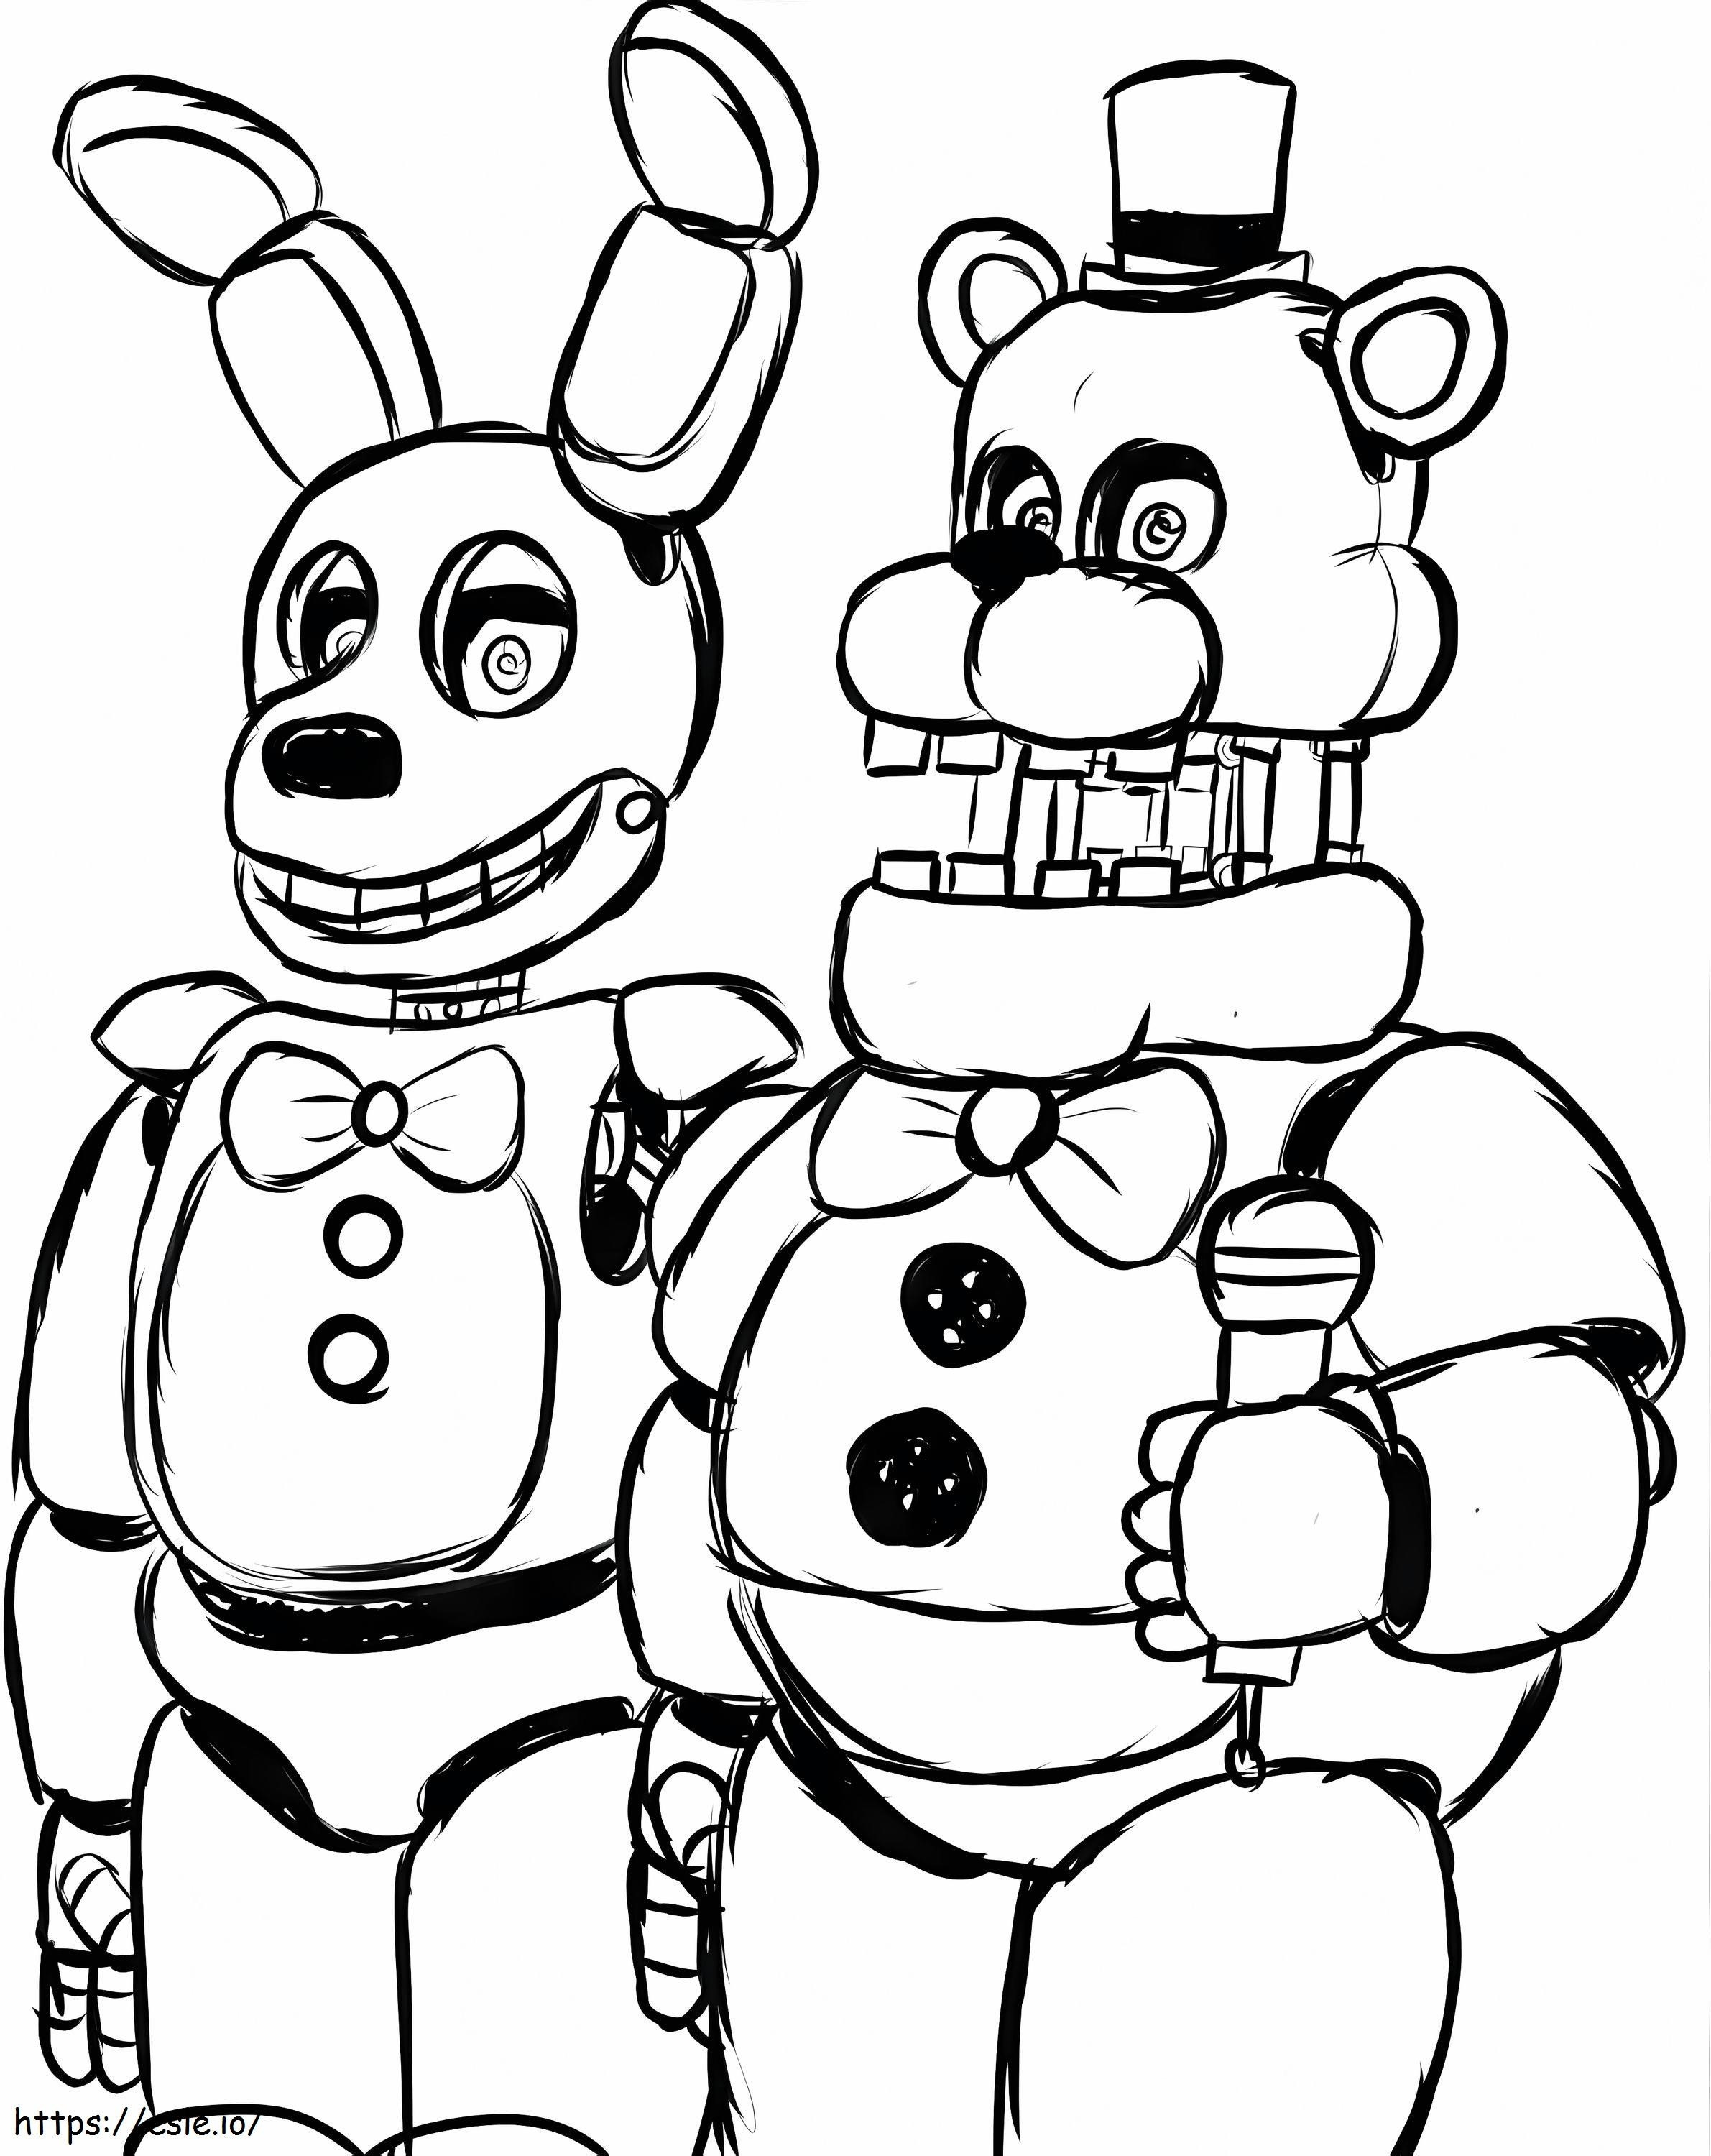 Bonnie And Freddy 5 Nights At Freddys coloring page